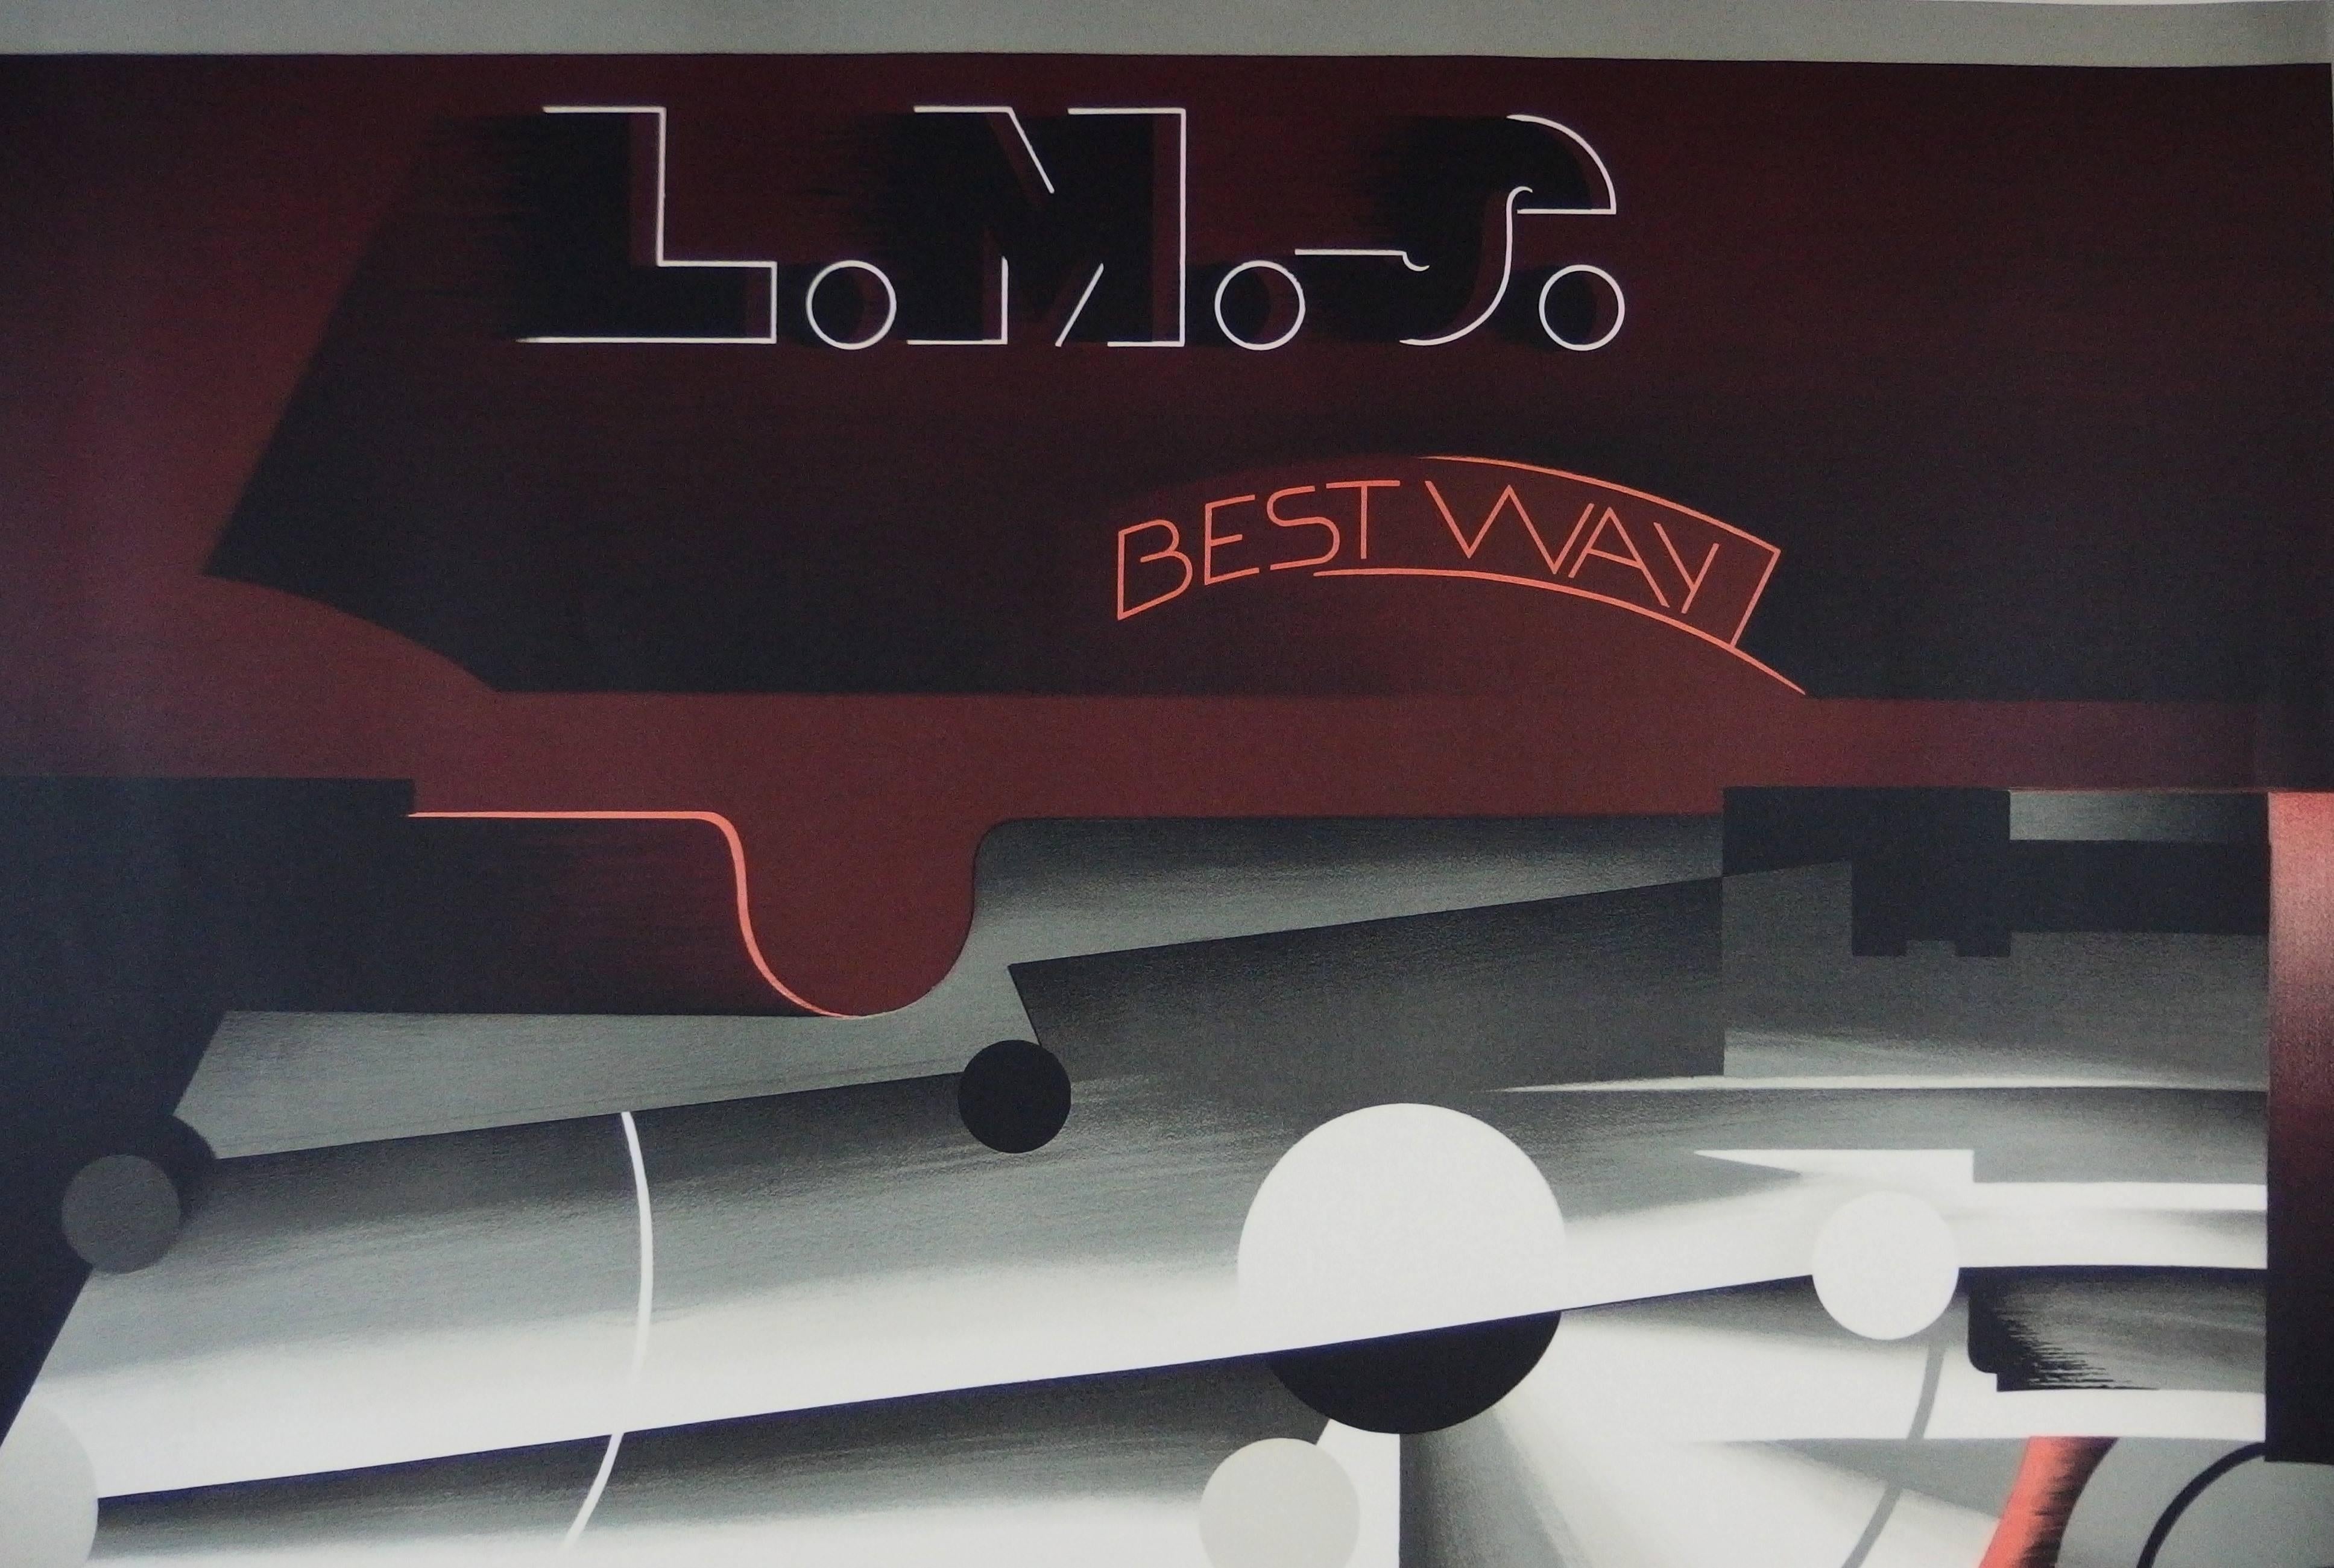 Railways : LMS Best Way - Lithograph - Plate signed (1985) - Art Deco Print by Adolphe Mouron Cassandre